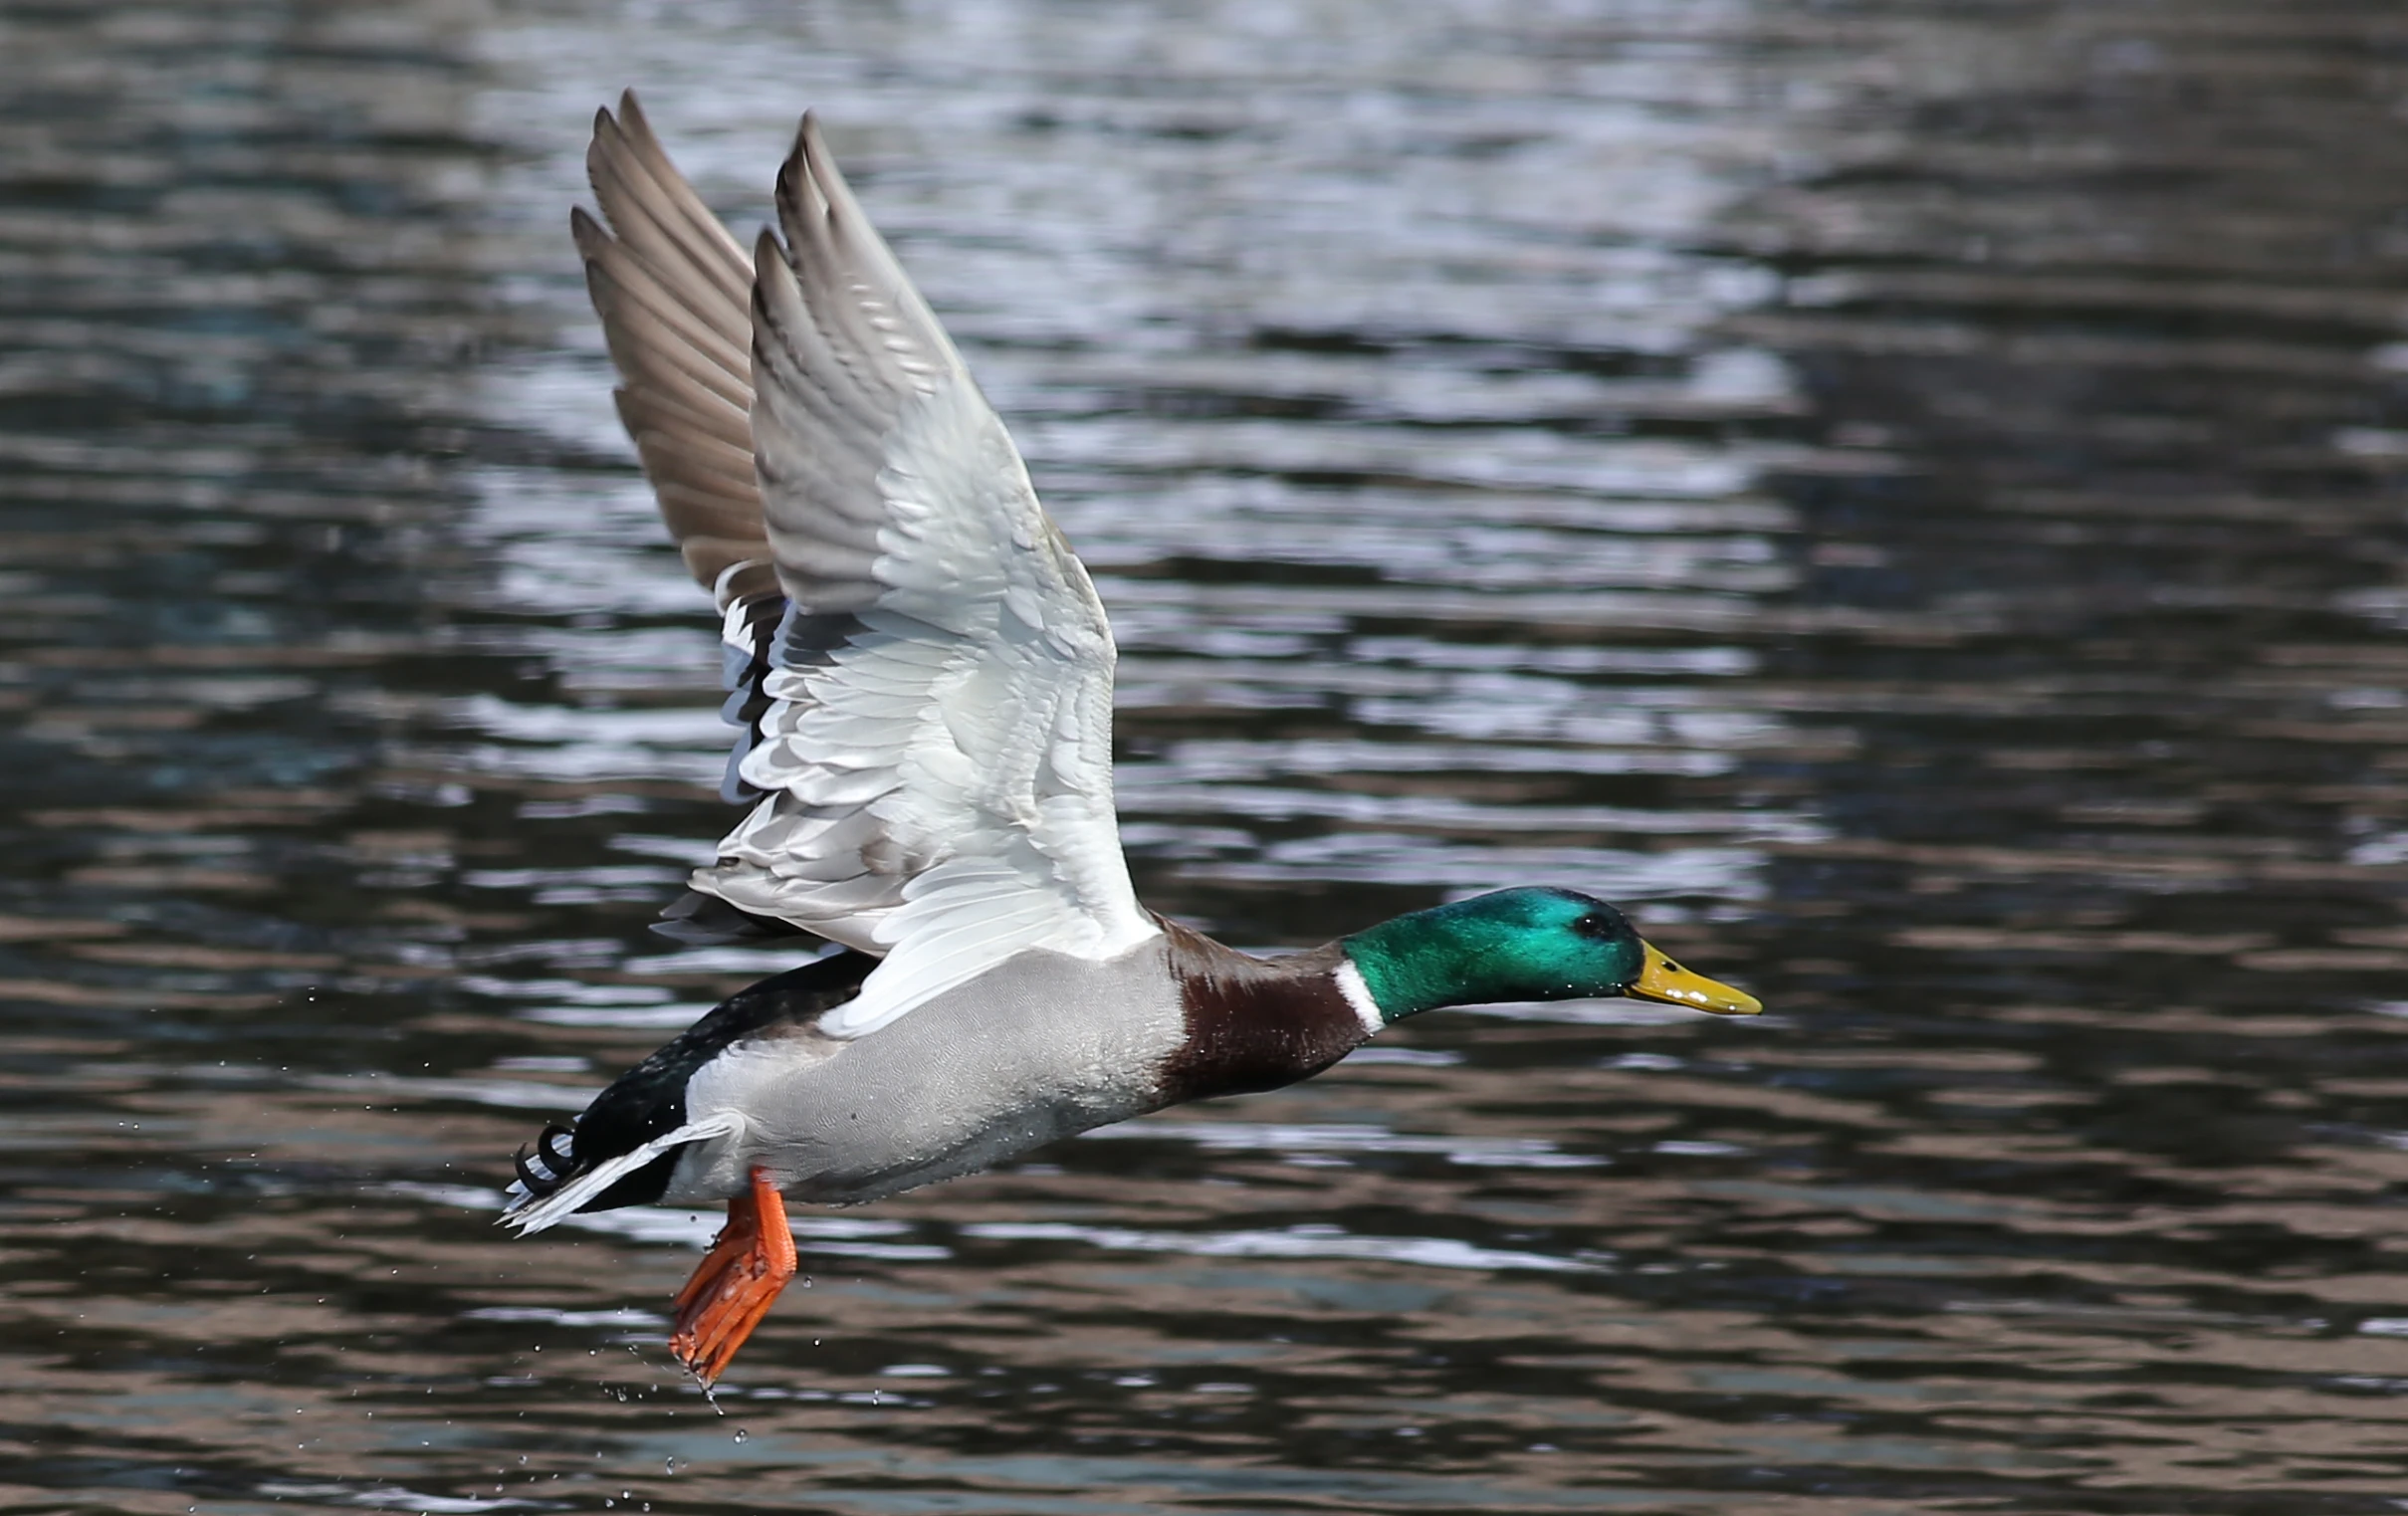 a duck is flying above the water with its wings open